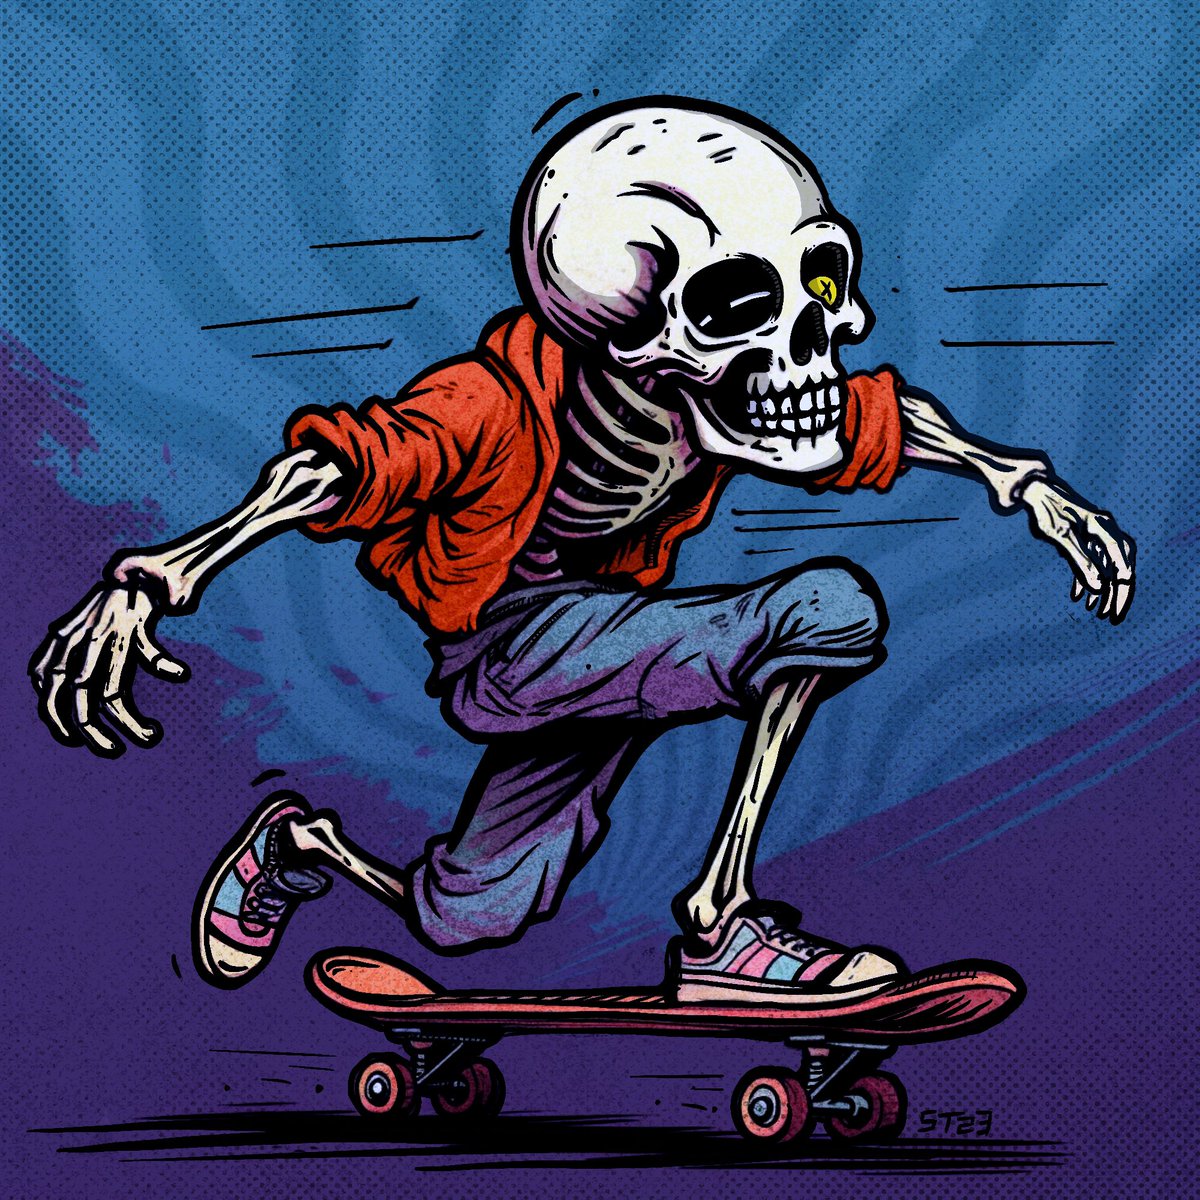 Shout out to @tenebrini & @DeathWishNFT for this sick “SkateFiend” piece for #GoSkateboardingDay2023 🛹 Art is everything!!! #MustLoveSkulls 💀